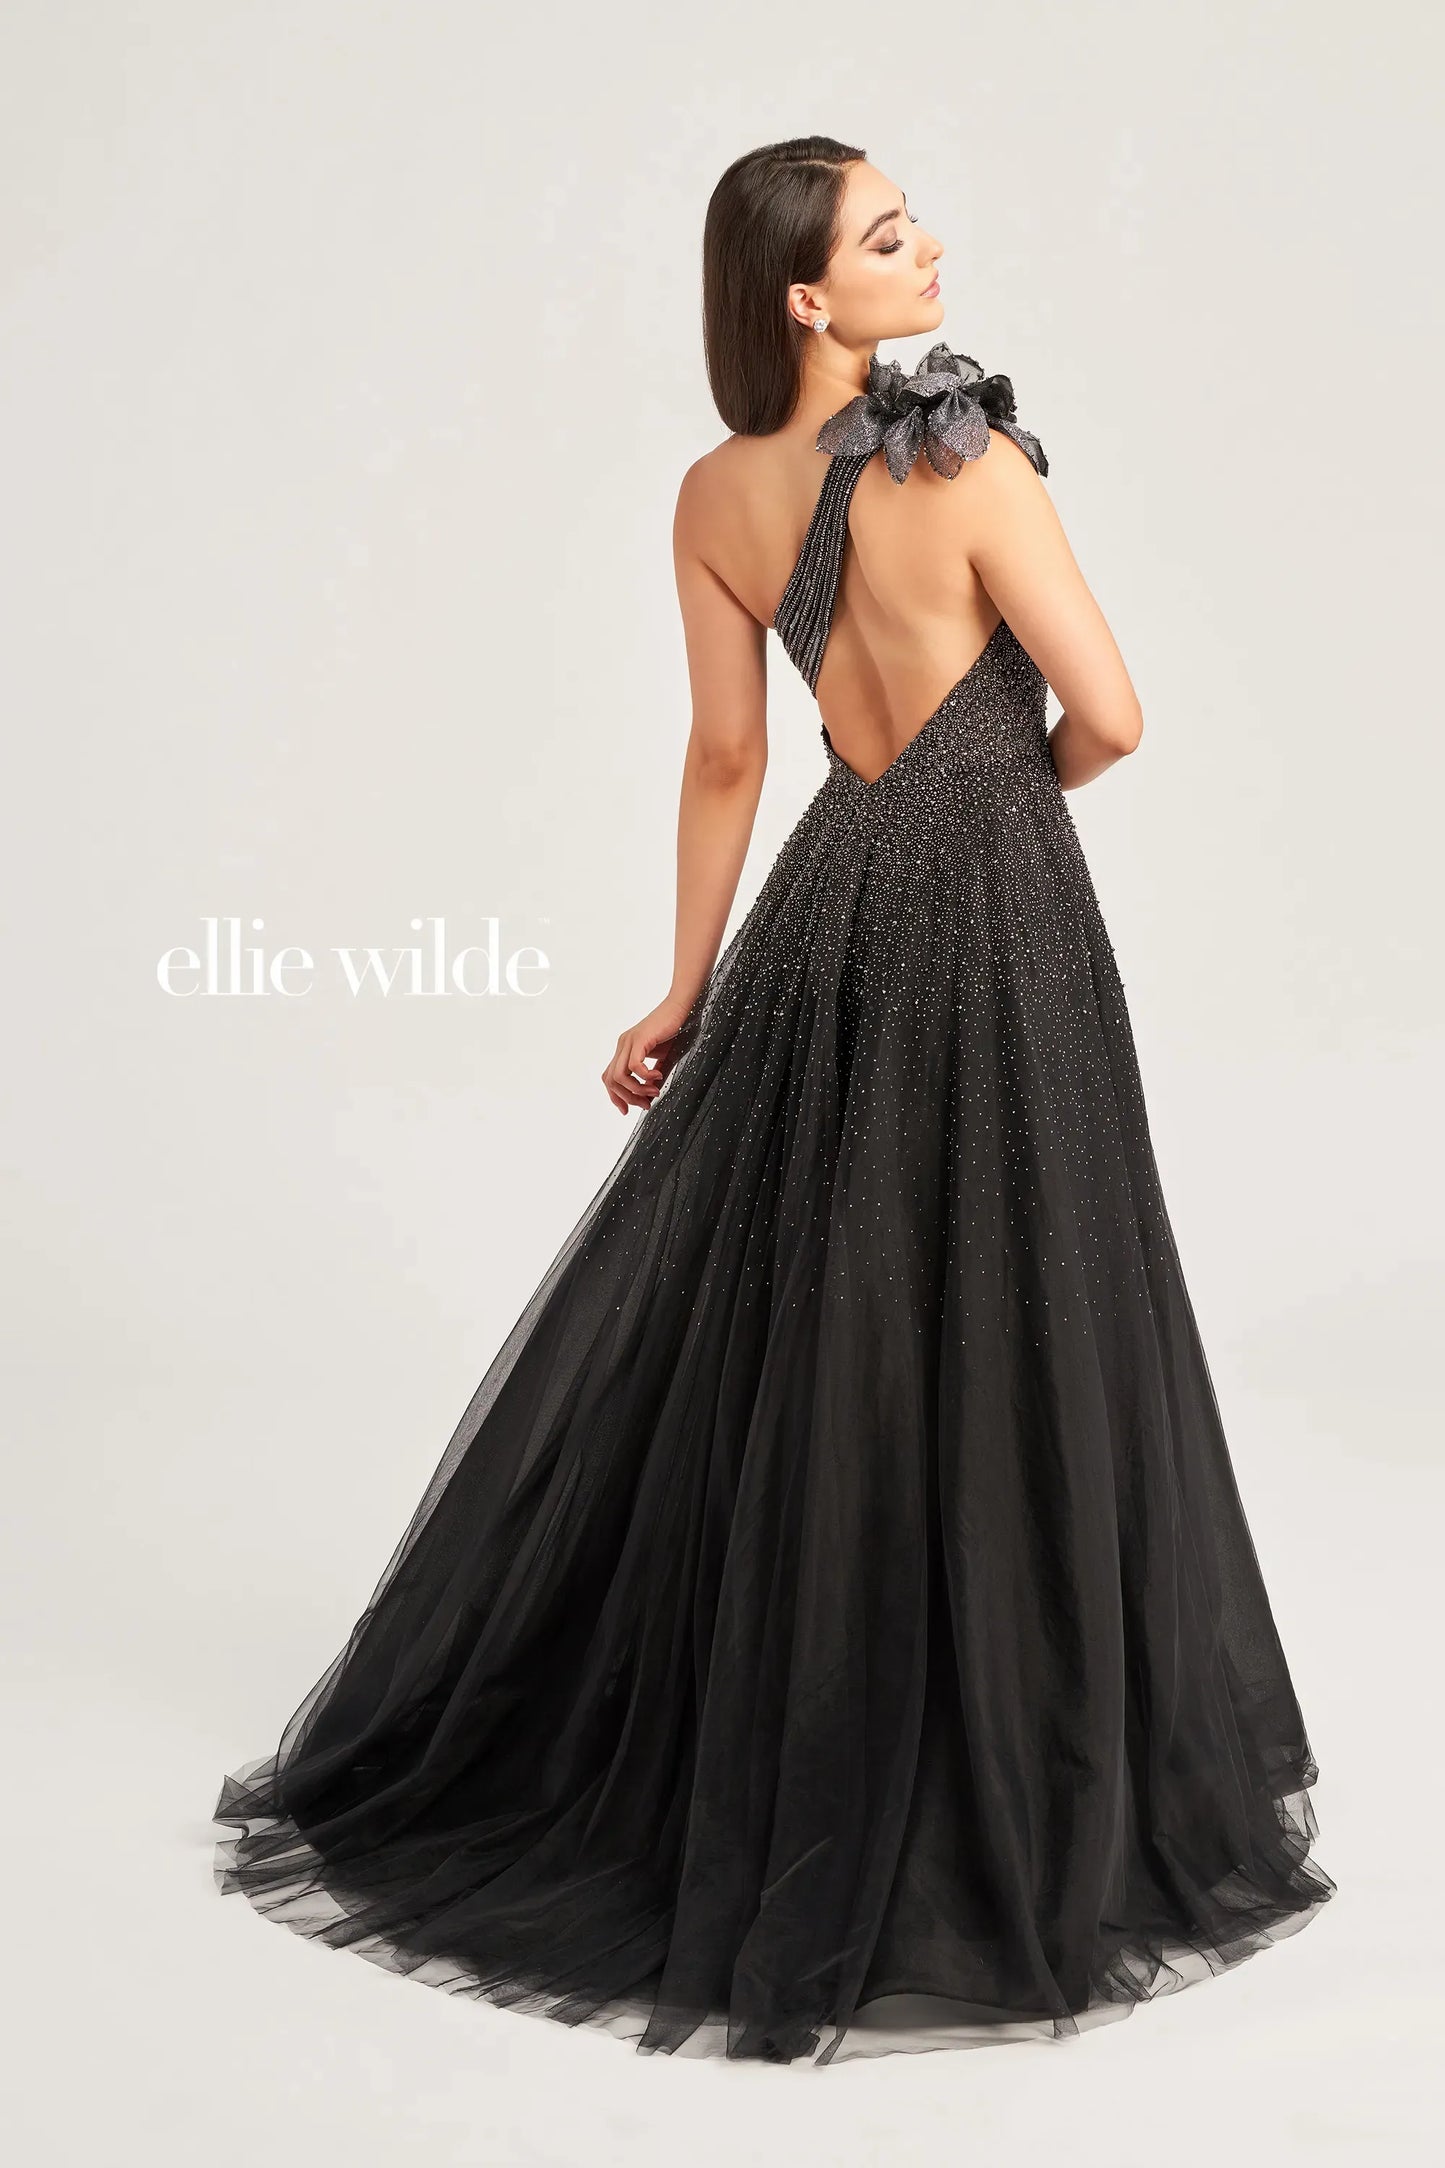 The Ellie Wilde EW35086 Dress boasts a stunning one shoulder cut out design adorned with intricate beading and a bow detail. Its ballgown silhouette, paired with a maxi slit, creates a dramatic and elegant look. Perfect for formal events, this dress is sure to make a lasting impression.  Sizes: 00-16  Colors: Misty Blue, Black/Gunmetal